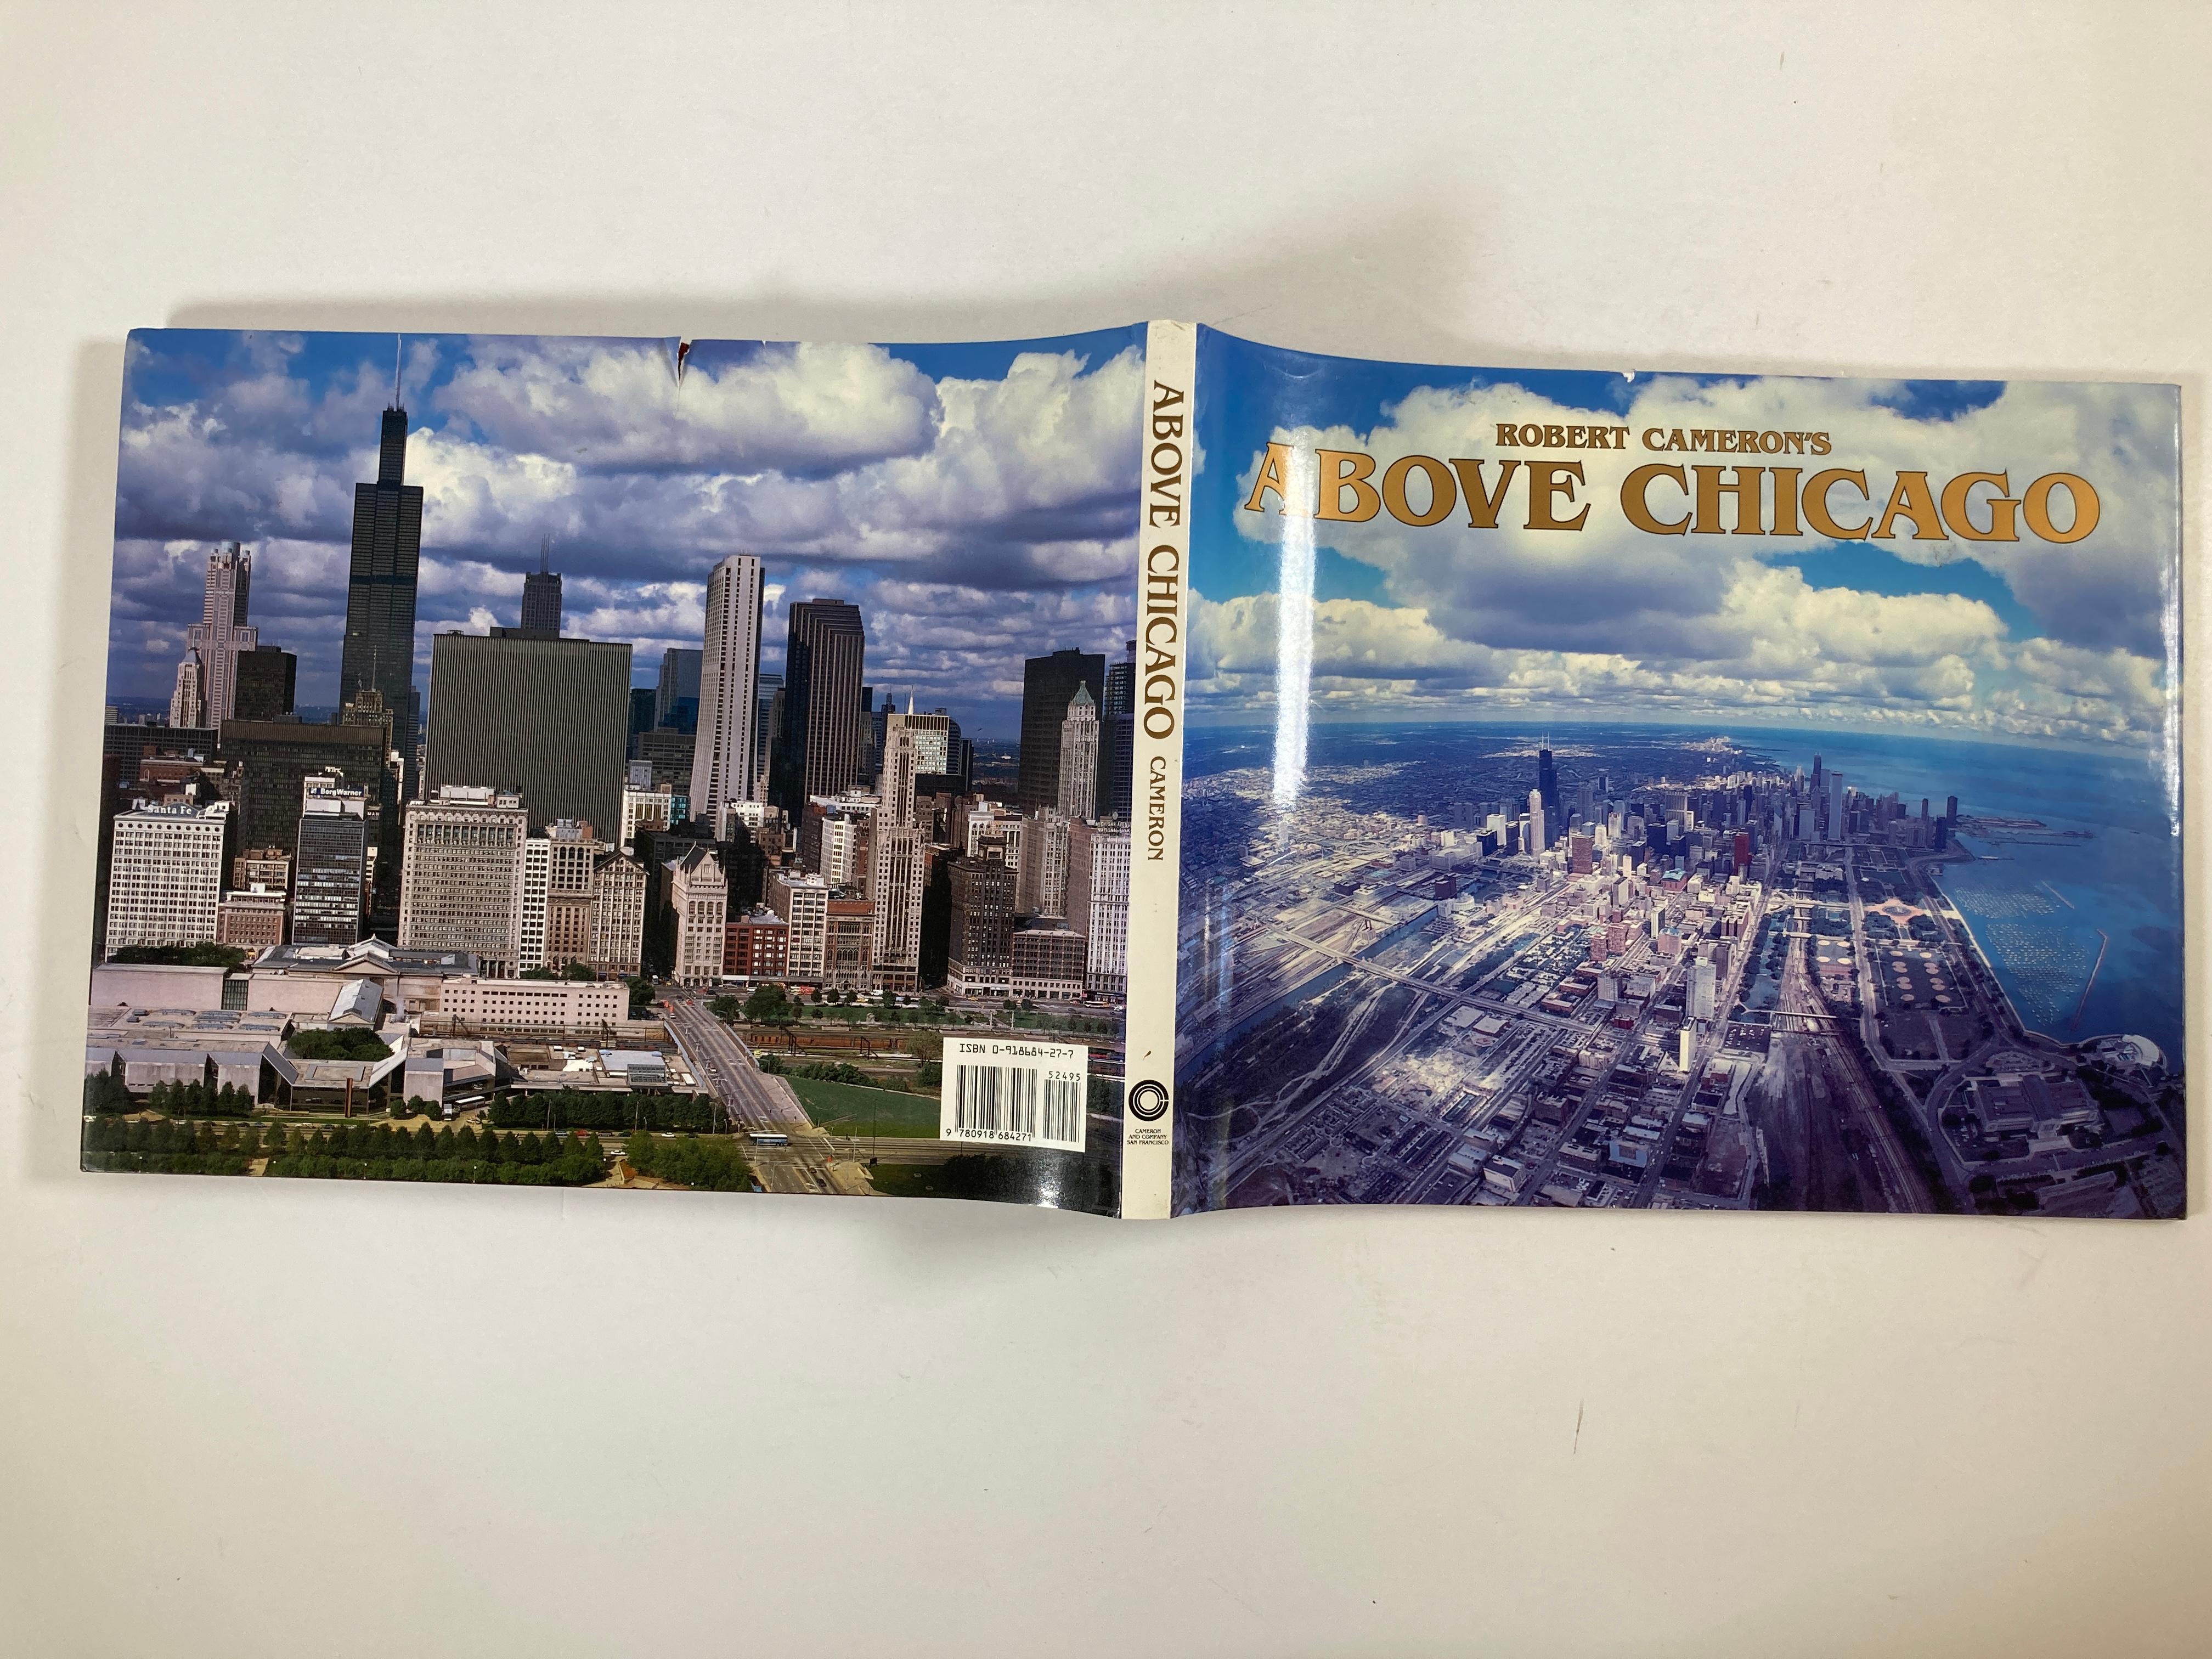 20th Century Above Chicago Book by Robert Cameron Hardcover Book